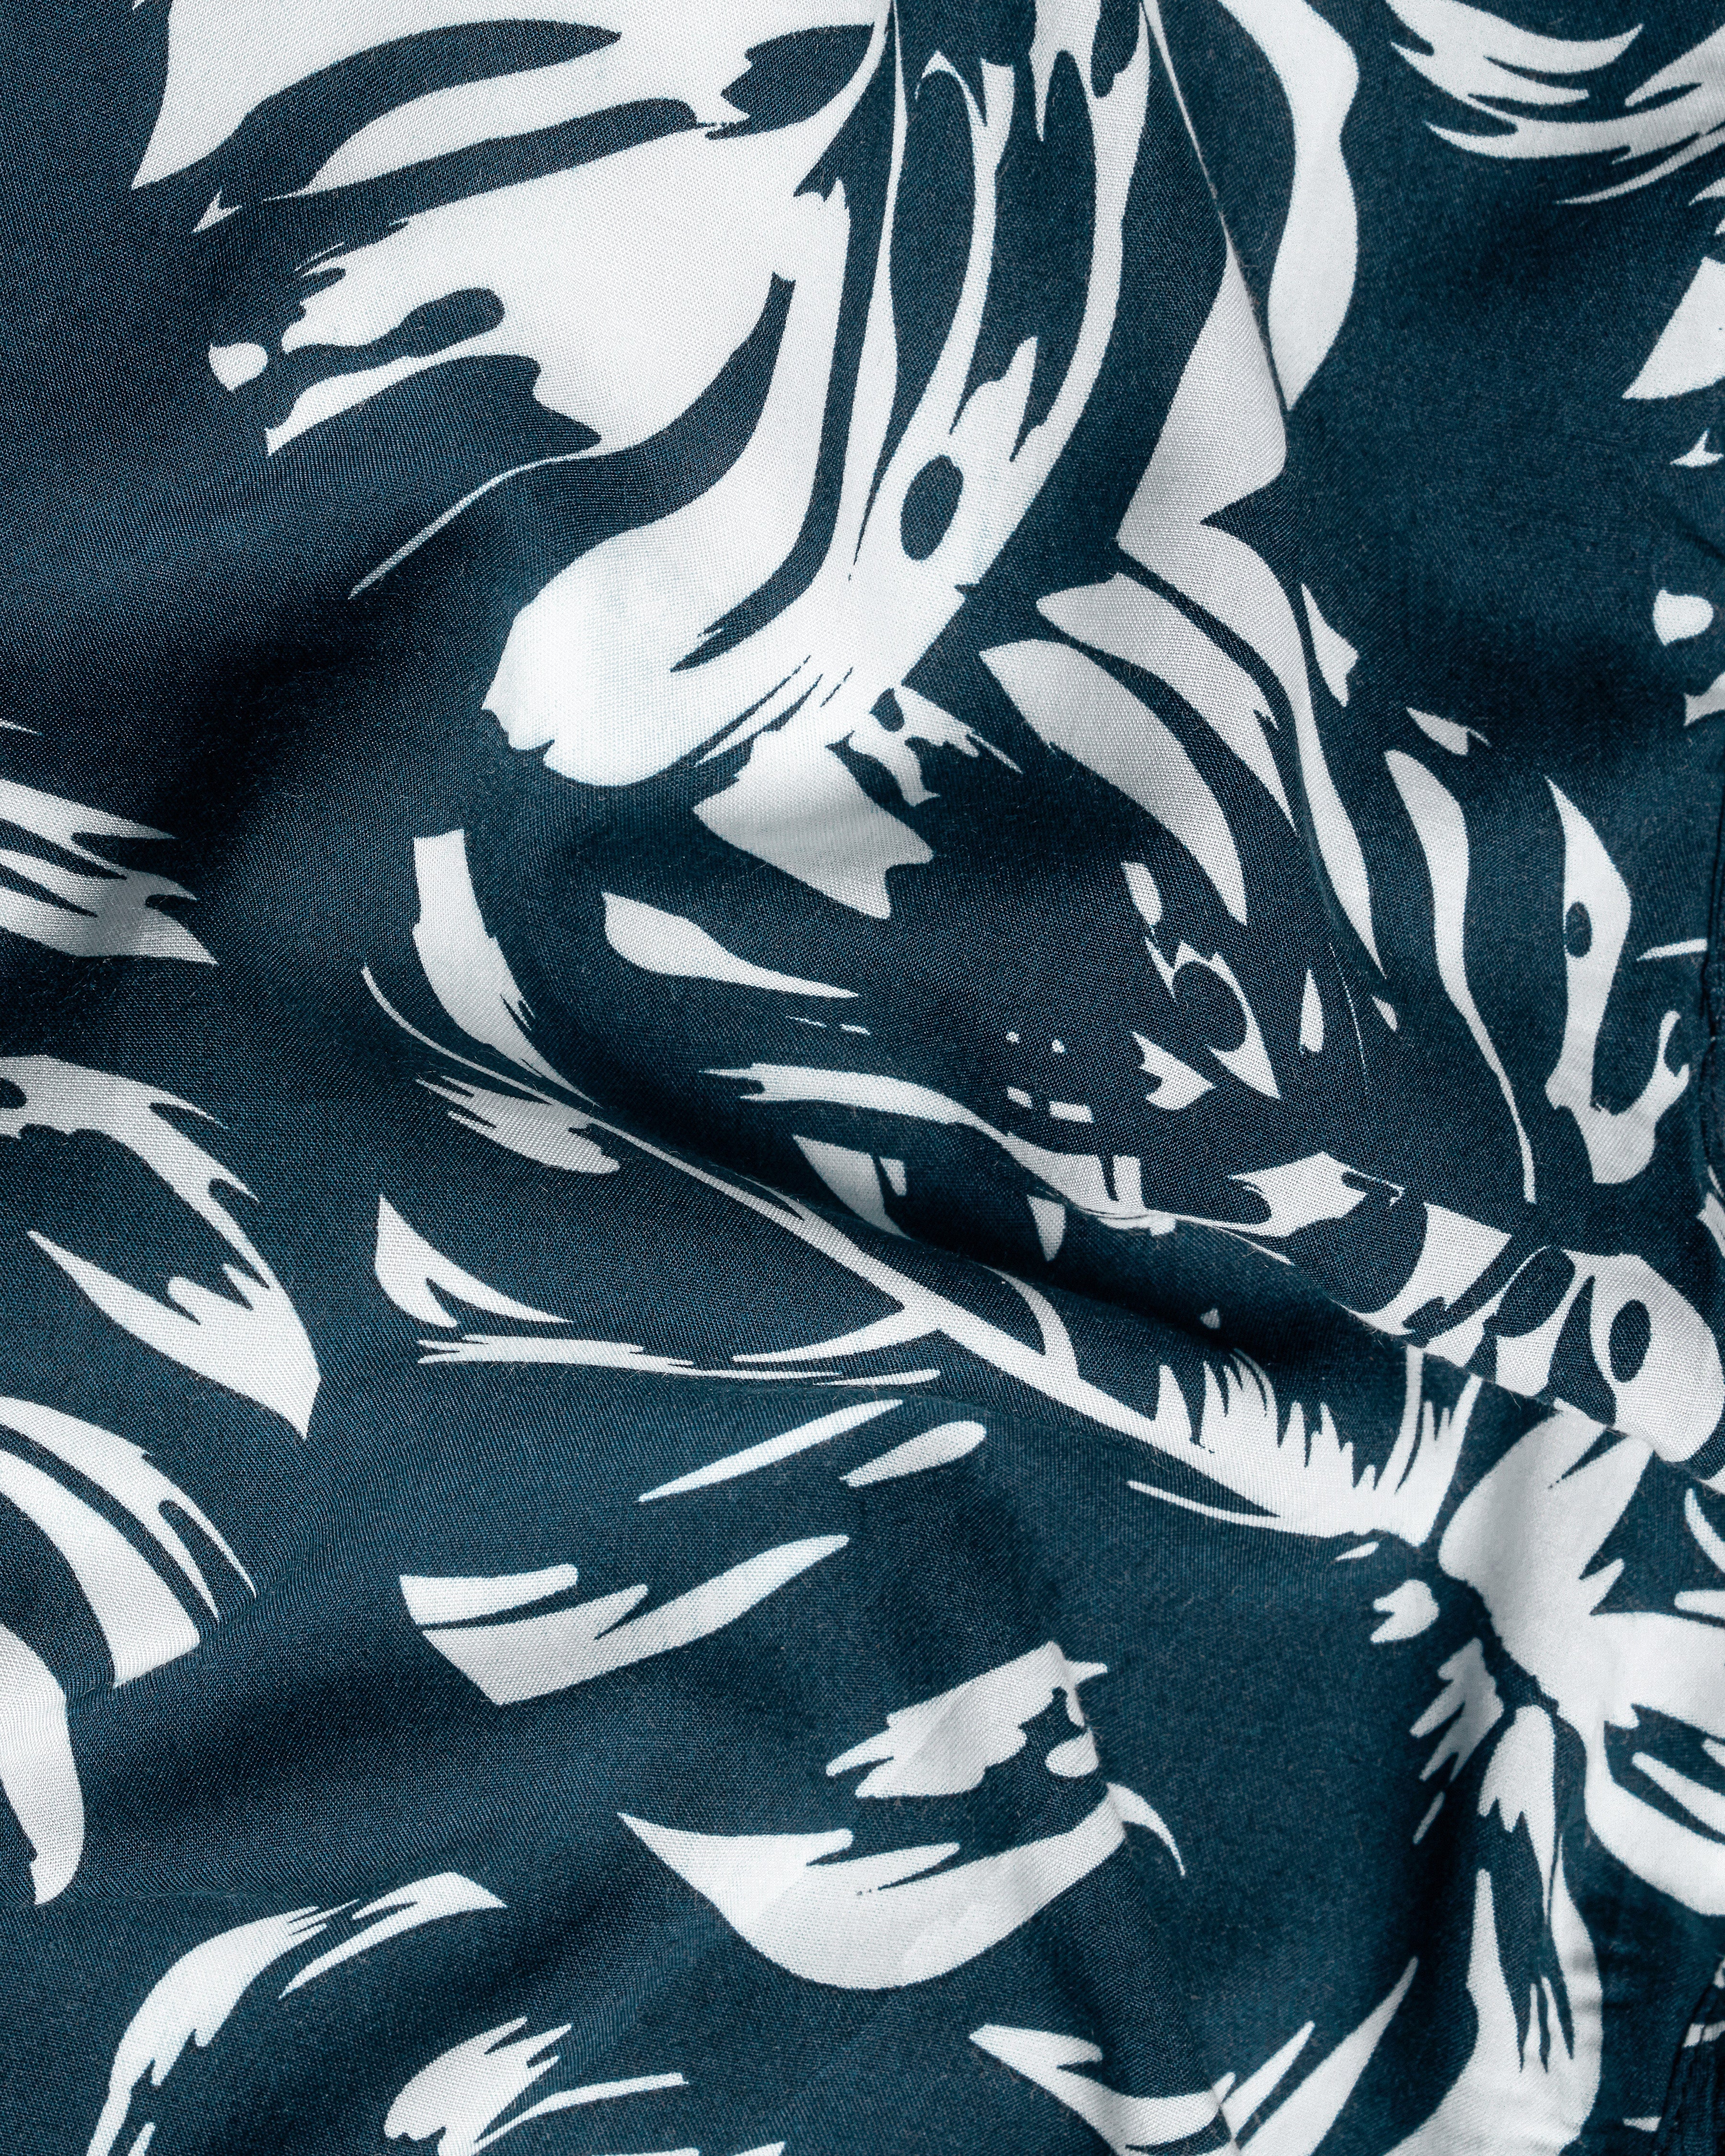 Shade Blue with White Leaves Printed Premium Tencel Shorts SR241-28, SR241-30, SR241-32, SR241-34, SR241-36, SR241-38, SR241-40, SR241-42, SR241-44